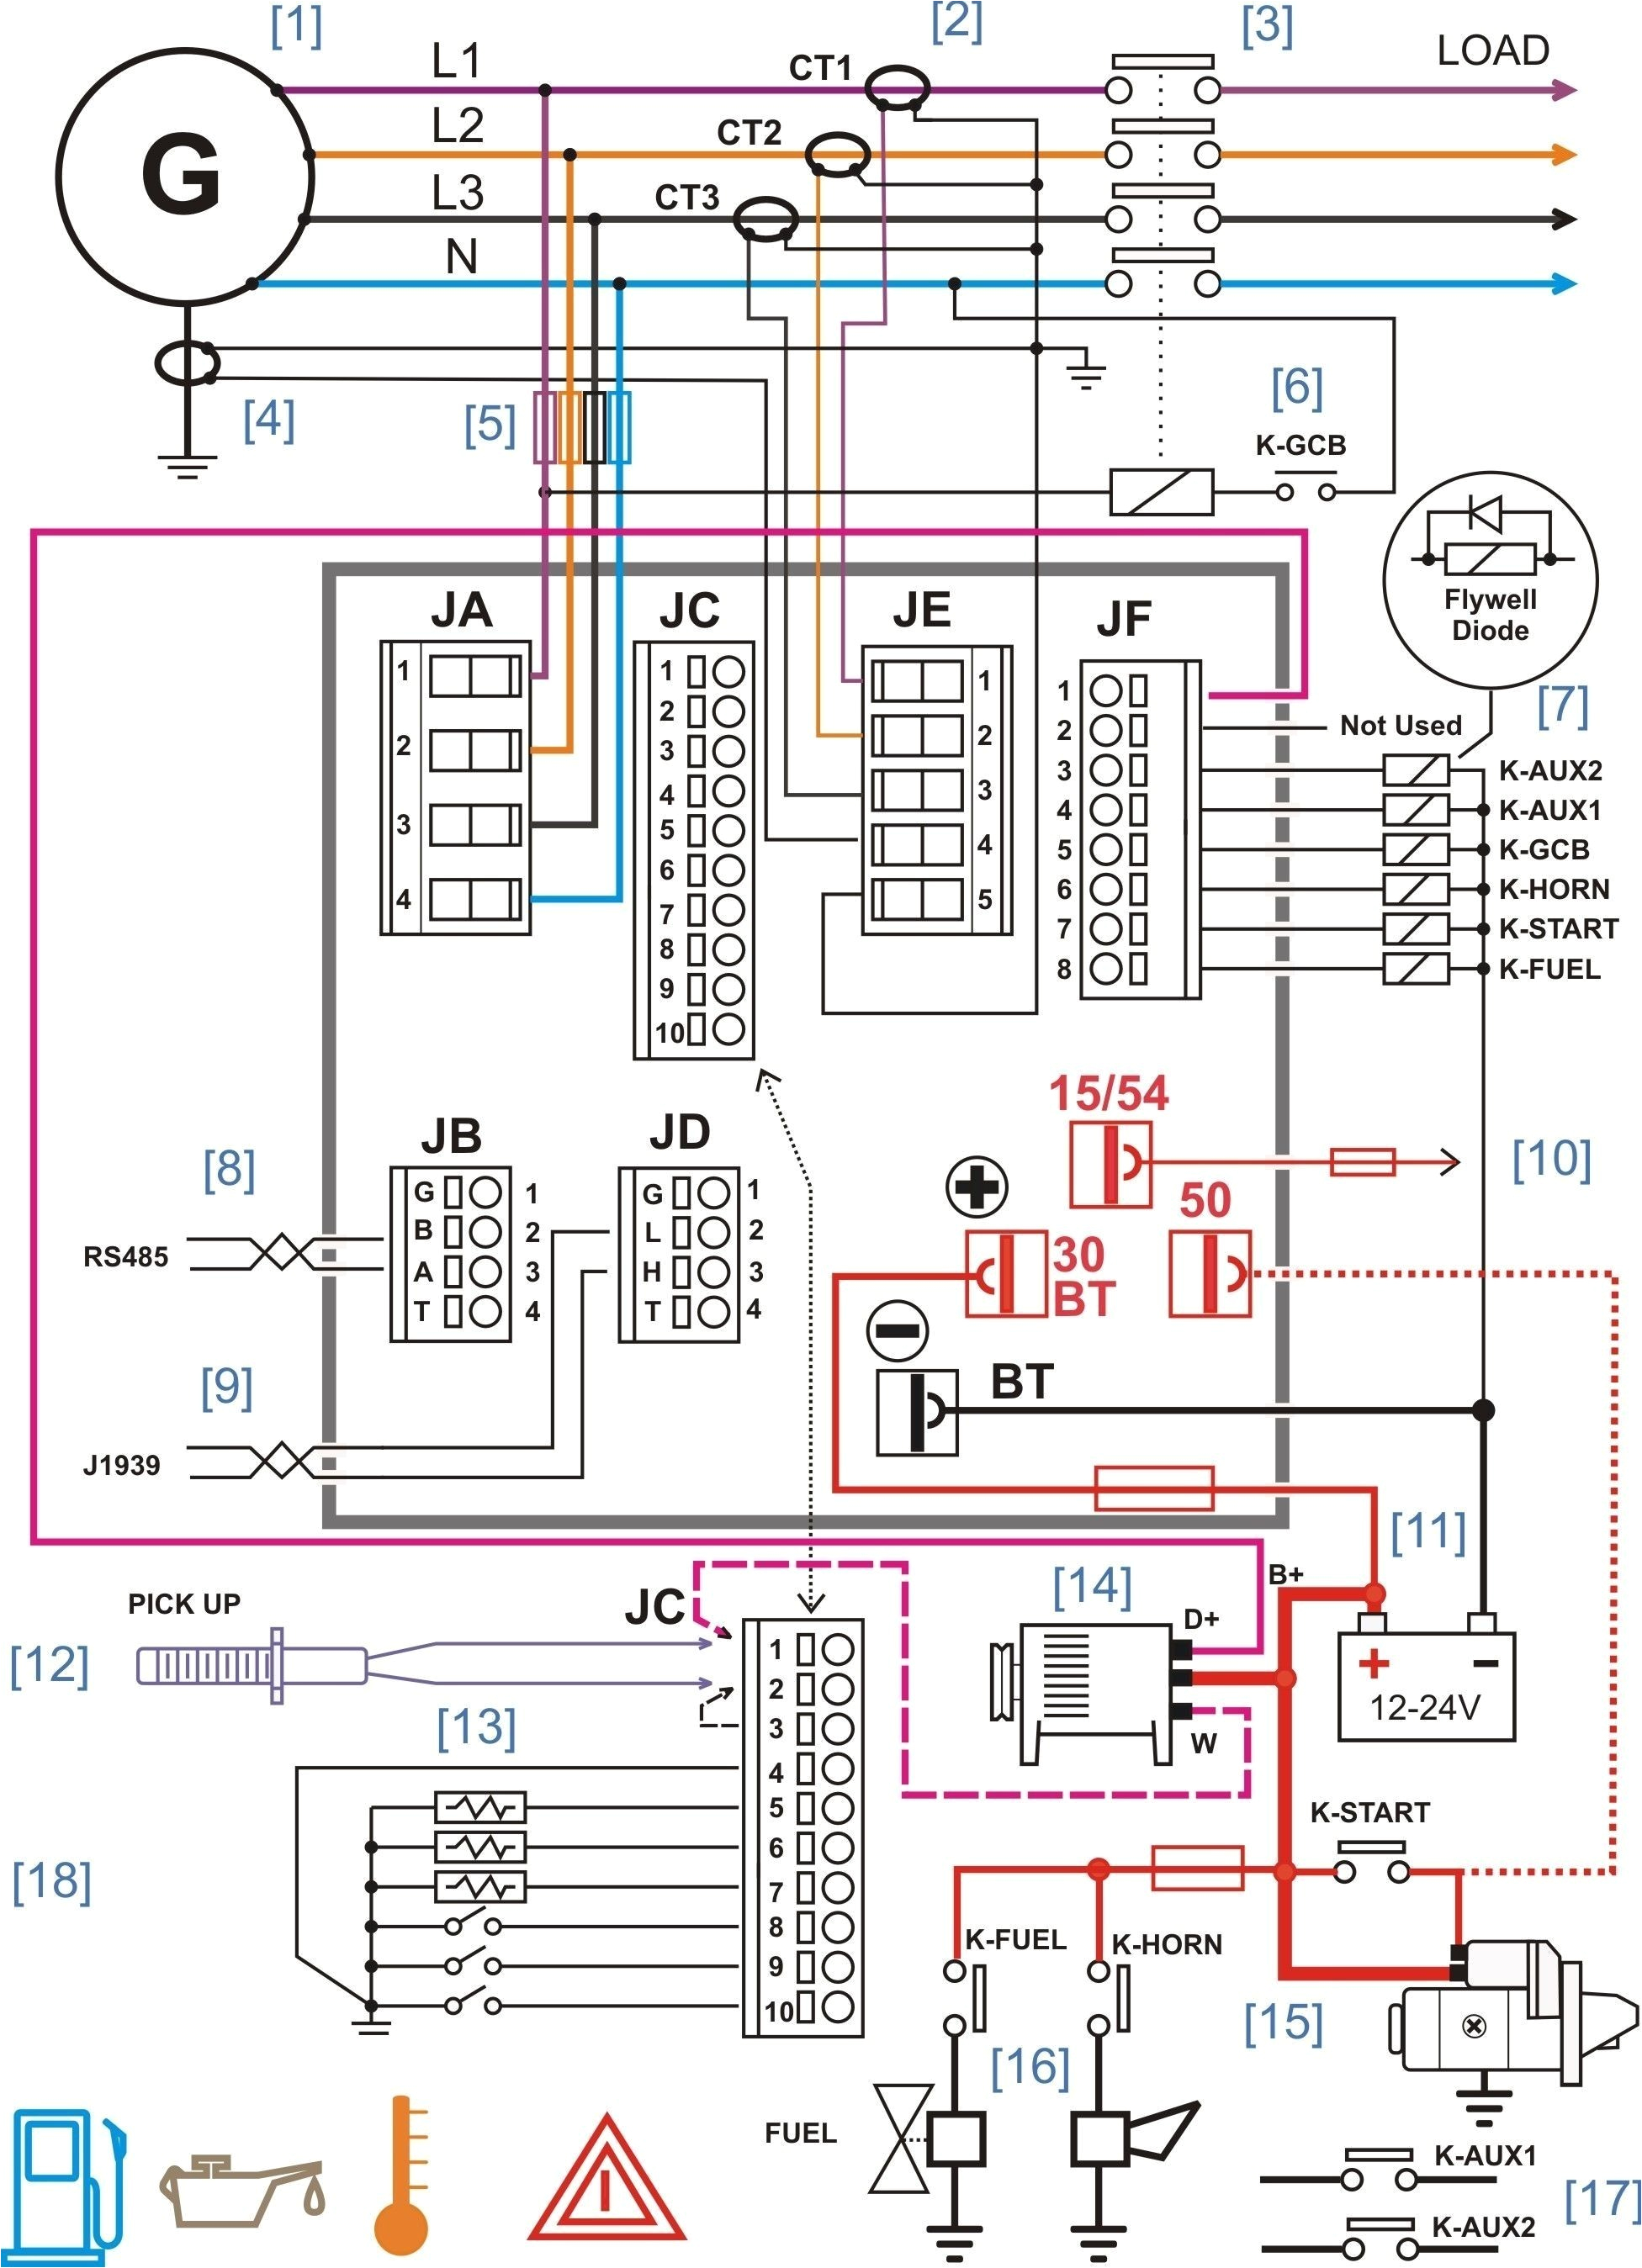 sound off signal wiring diagrams wiring diagram databaseemi wiring diagram wiring diagram sound off signal wiring